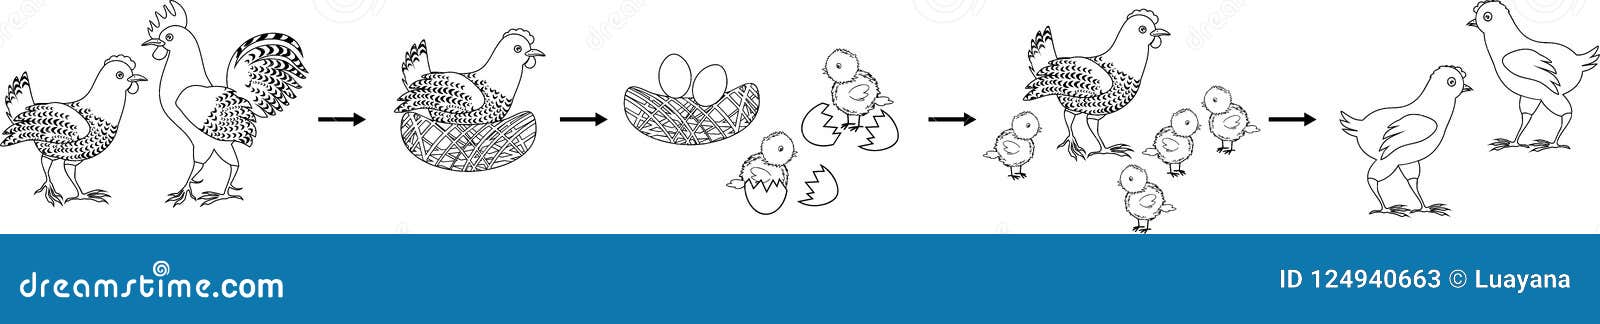 Coloring page chicken life cycle stock vector